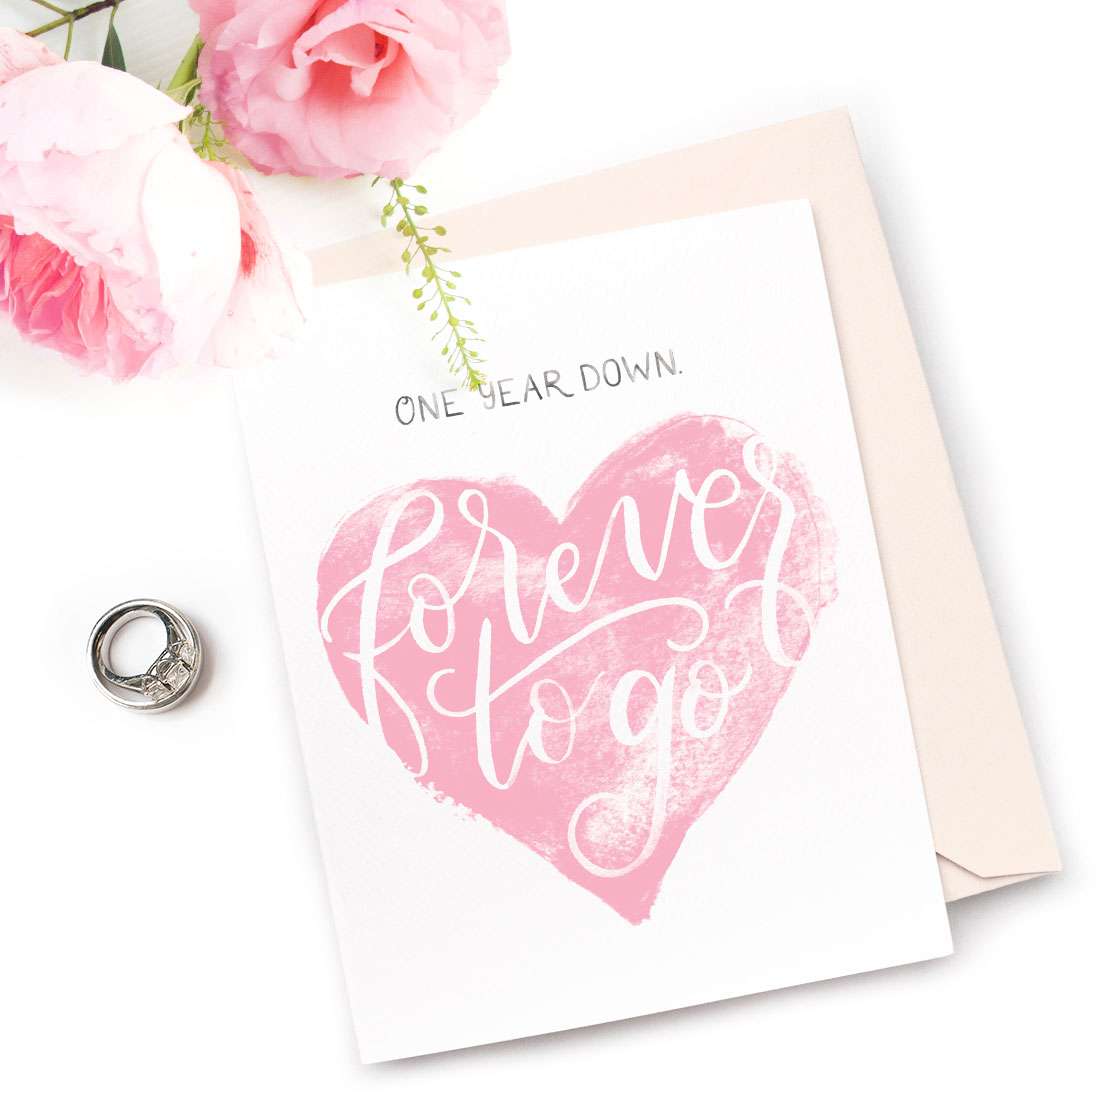 Image of a hand-lettered watercolor card saying "one year down. forever to go" with a watercolor heart by CharmCat | charmcat.net